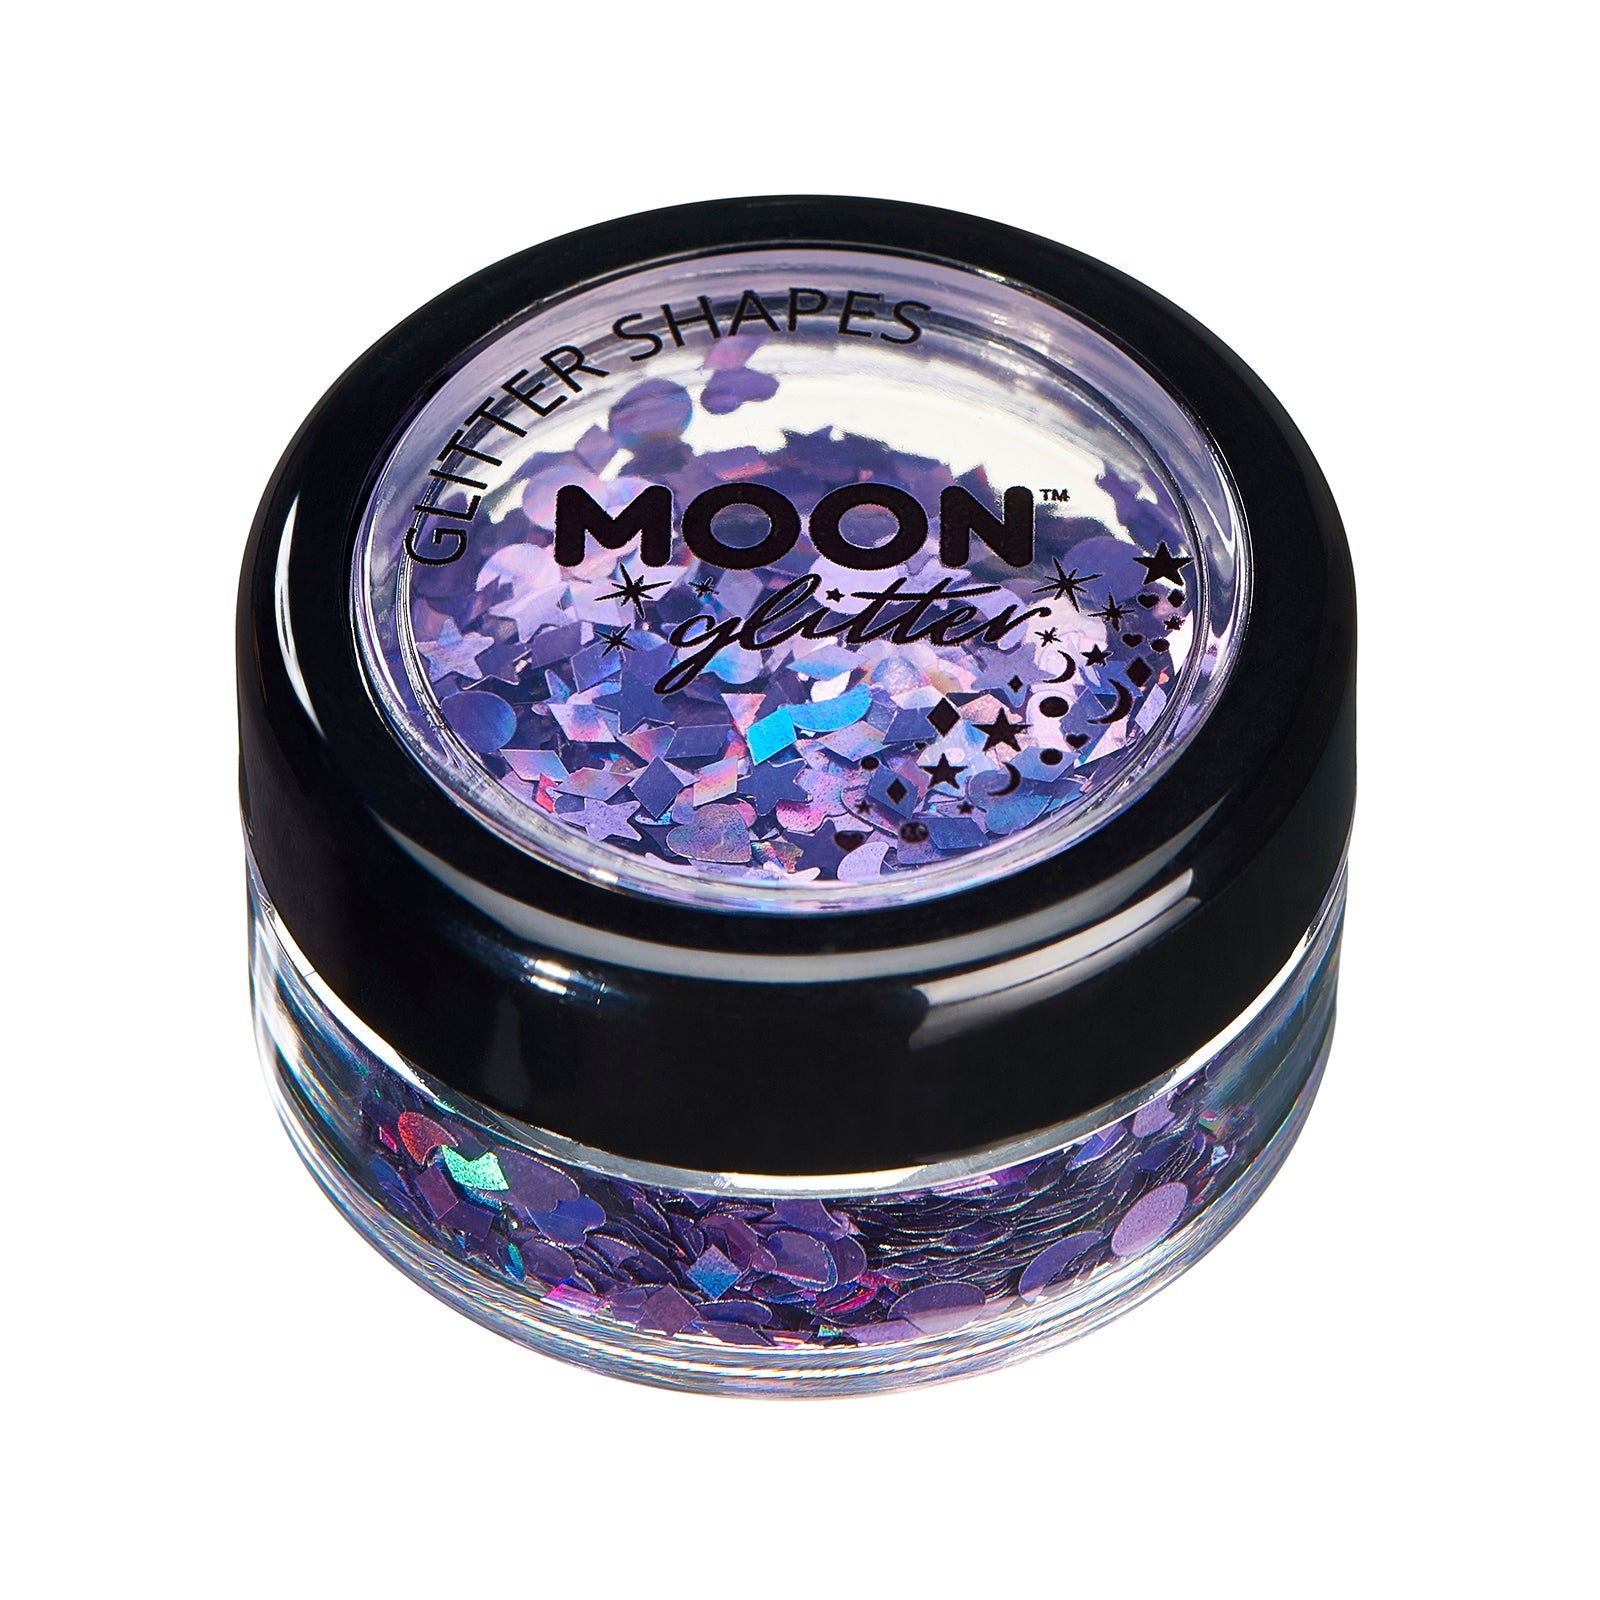 Purple - Holographic Face & Body Glitter Shapes, 3g. Cosmetically certified, FDA & Health Canada compliant, cruelty free and vegan.